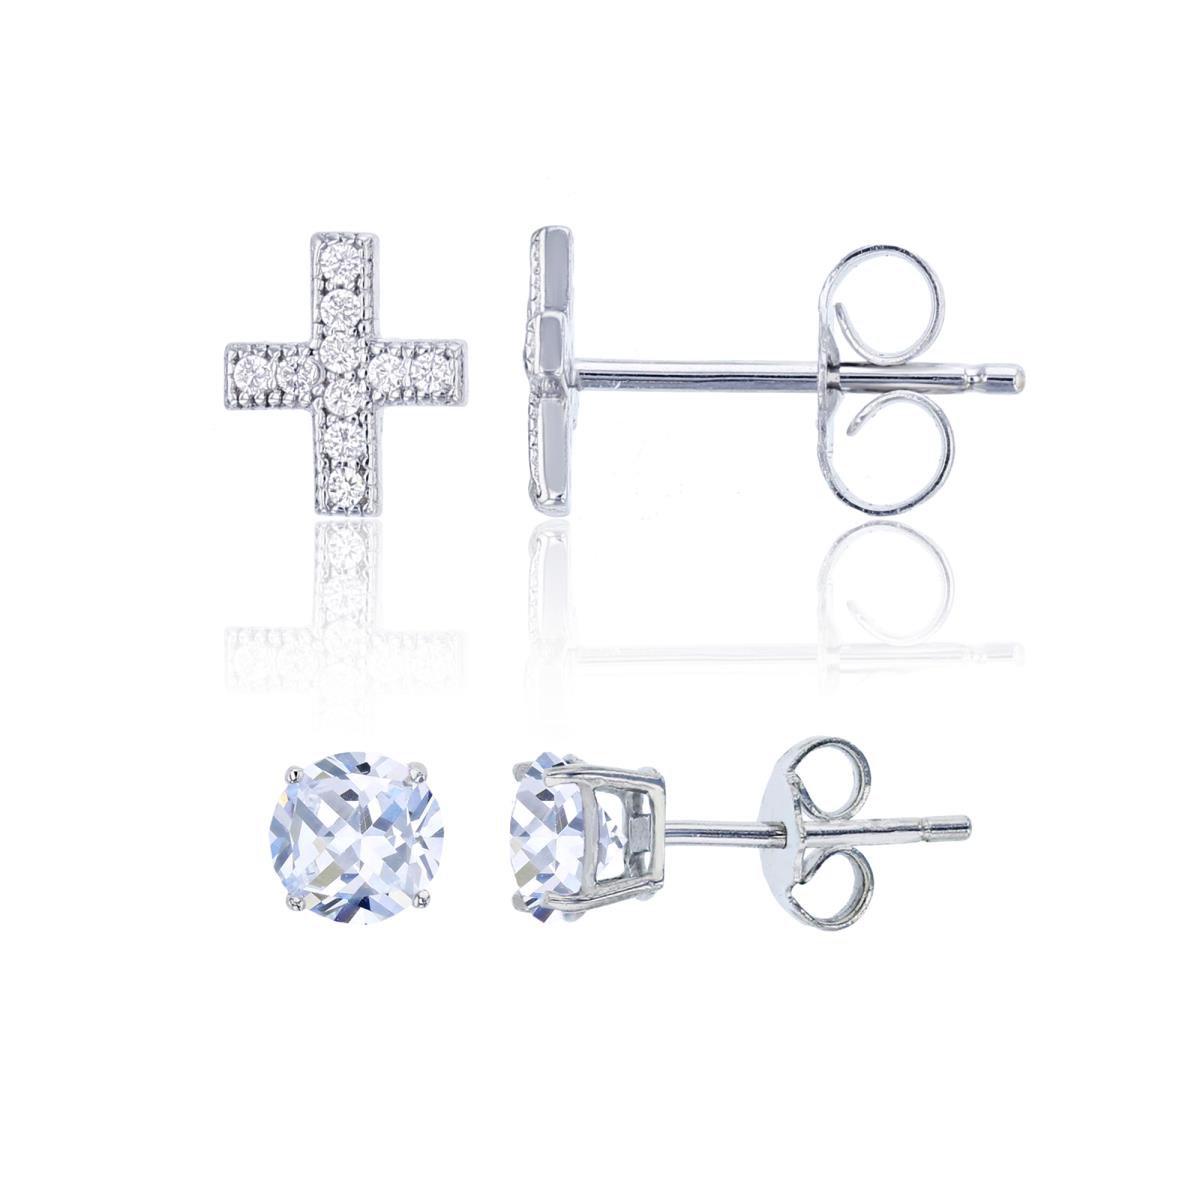 Sterling Silver Micropave Petite Cross & 4mm Round Solitaire Stud Earring Set